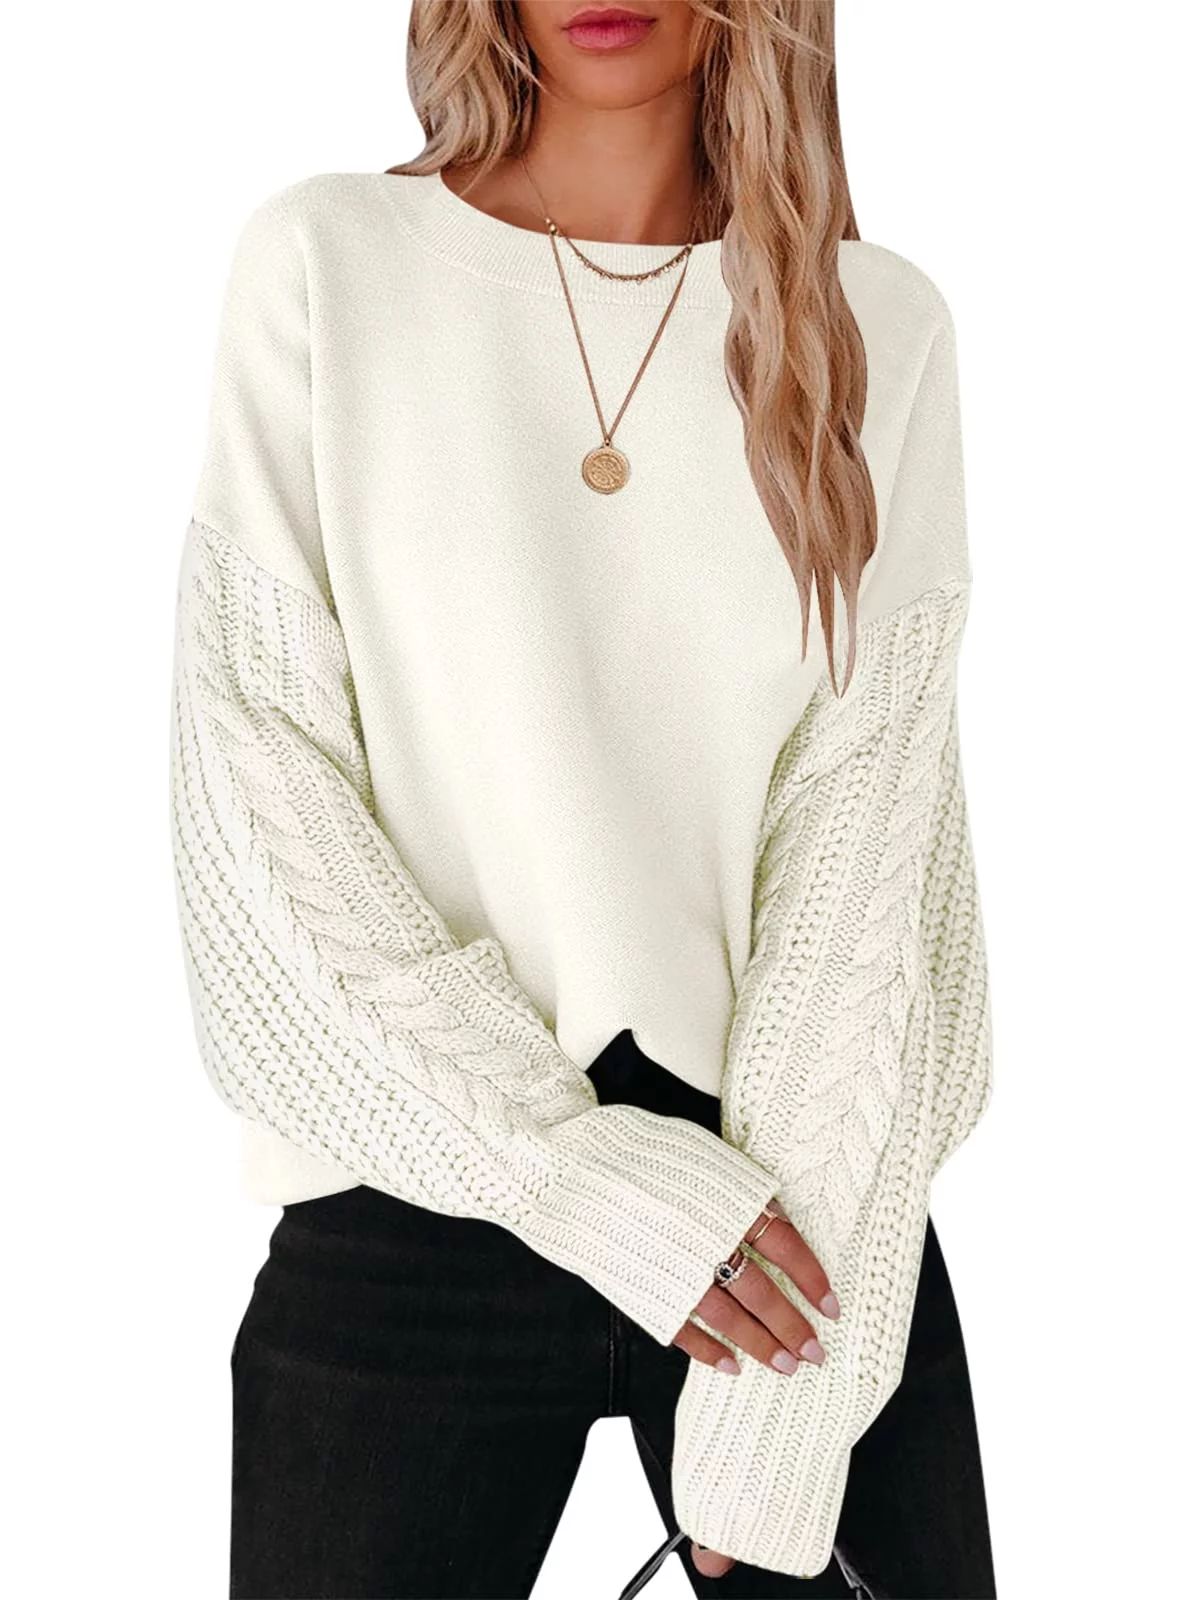 Sweaters for Women Oversized Long Sleeve Sweater Womens Cable Knit Pullover Casual Warm Tops | Walmart (US)